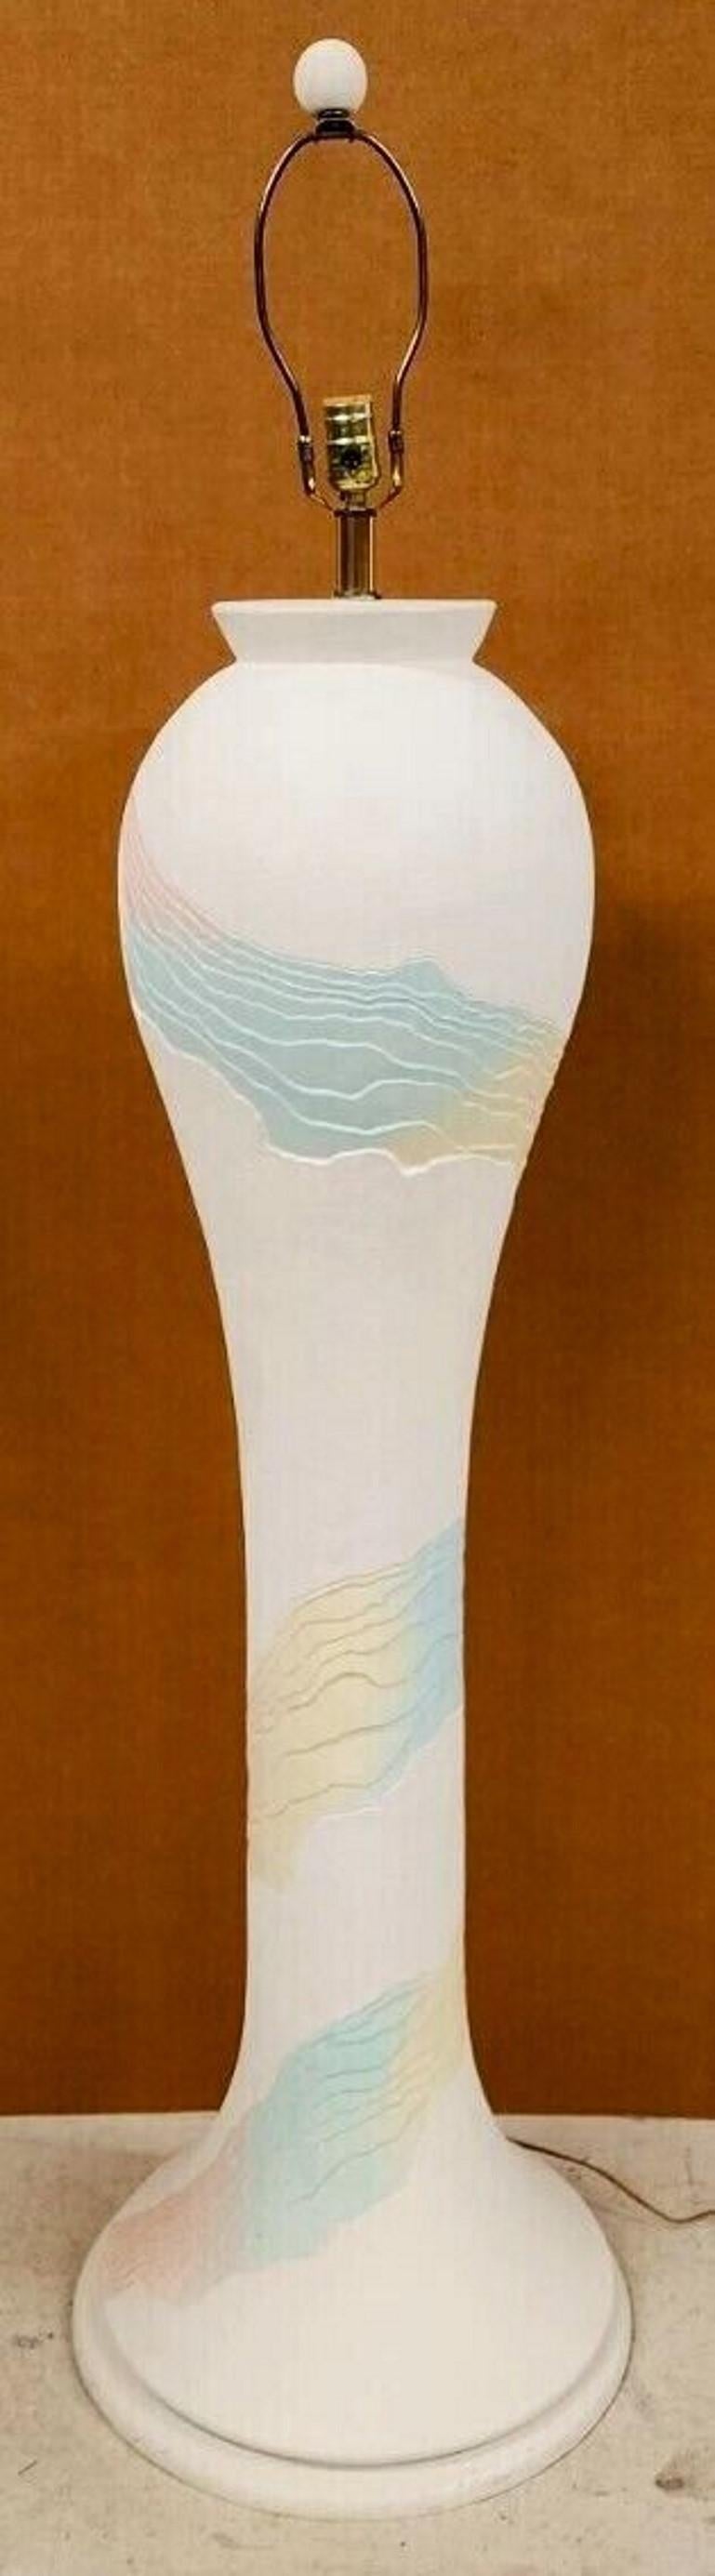 For FULL item description click on CONTINUE READING at the bottom of this page.

Offering One Of Our Recent Palm Beach Estate Fine Lighting Acquisitions Of A
Pair of 1970's Southwestern Style Ceramic/Plaster Floor Lamp Signed LEE REYNOLDS